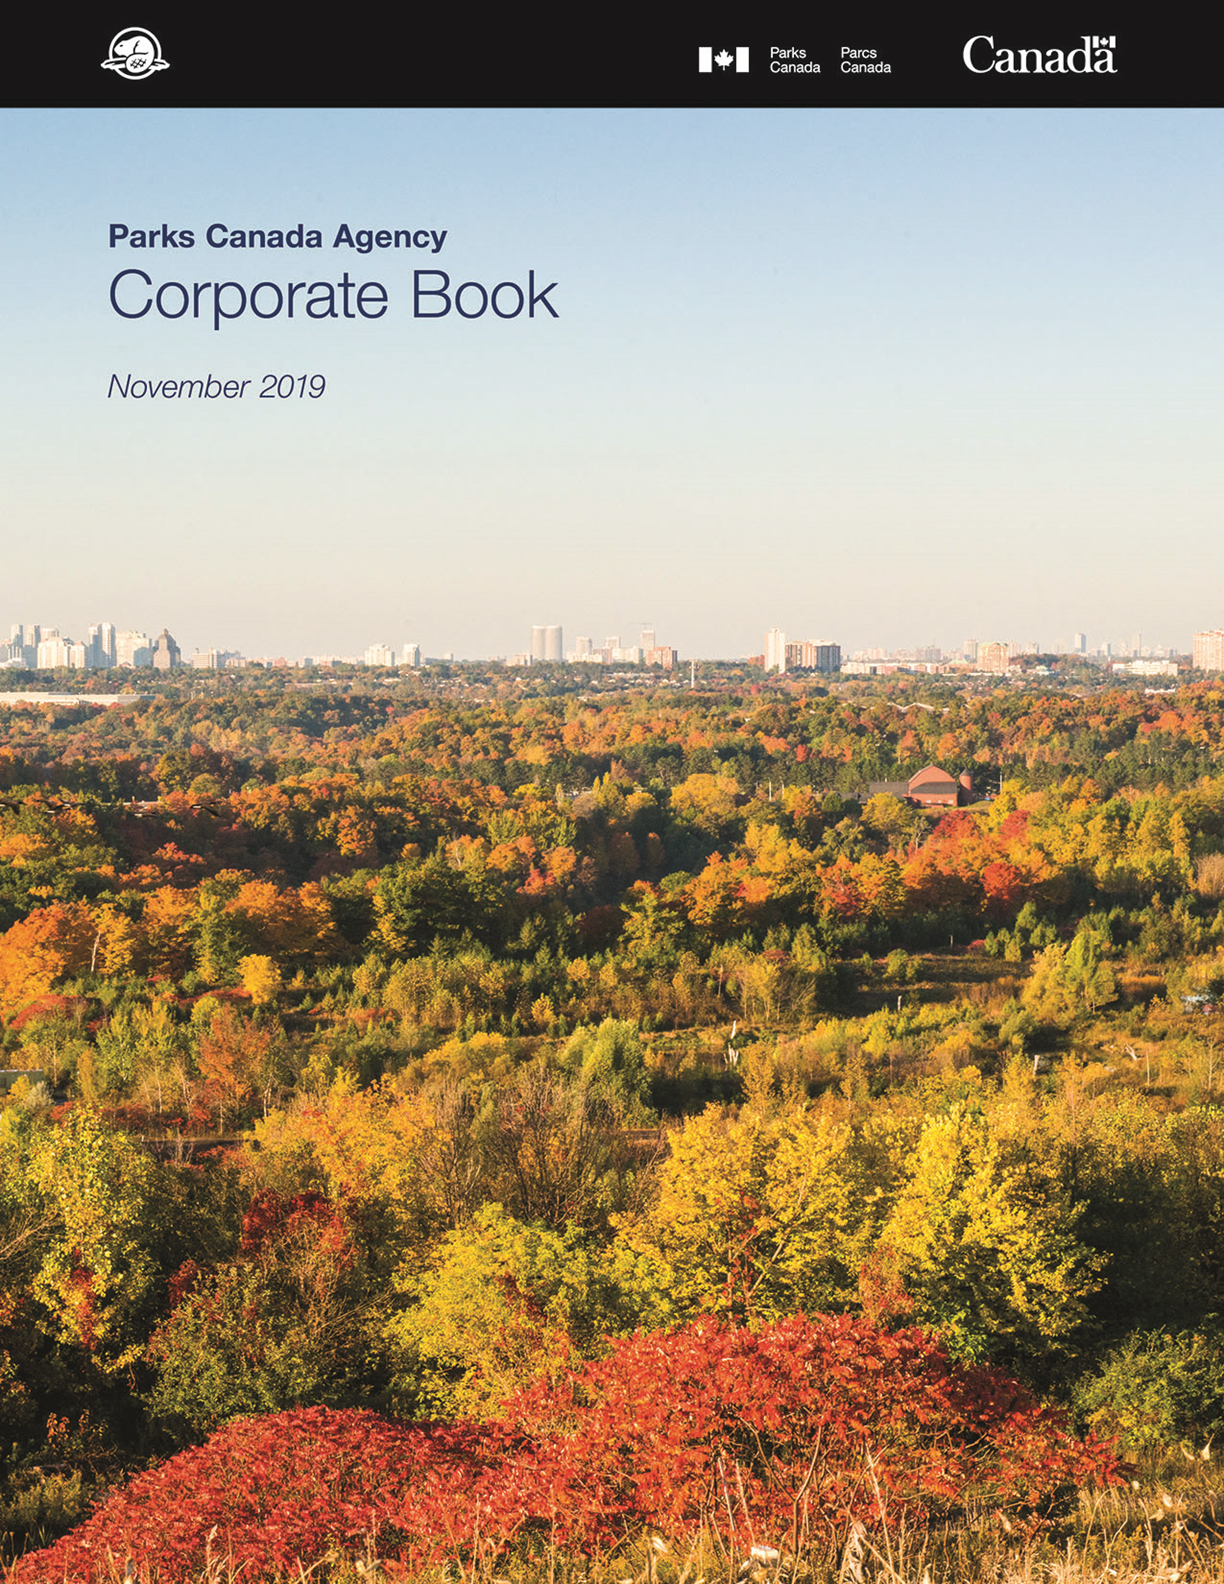 Rouge Urban National Park in the autumn. Text reads: Parks Canada Agency Corporate Book November 2019